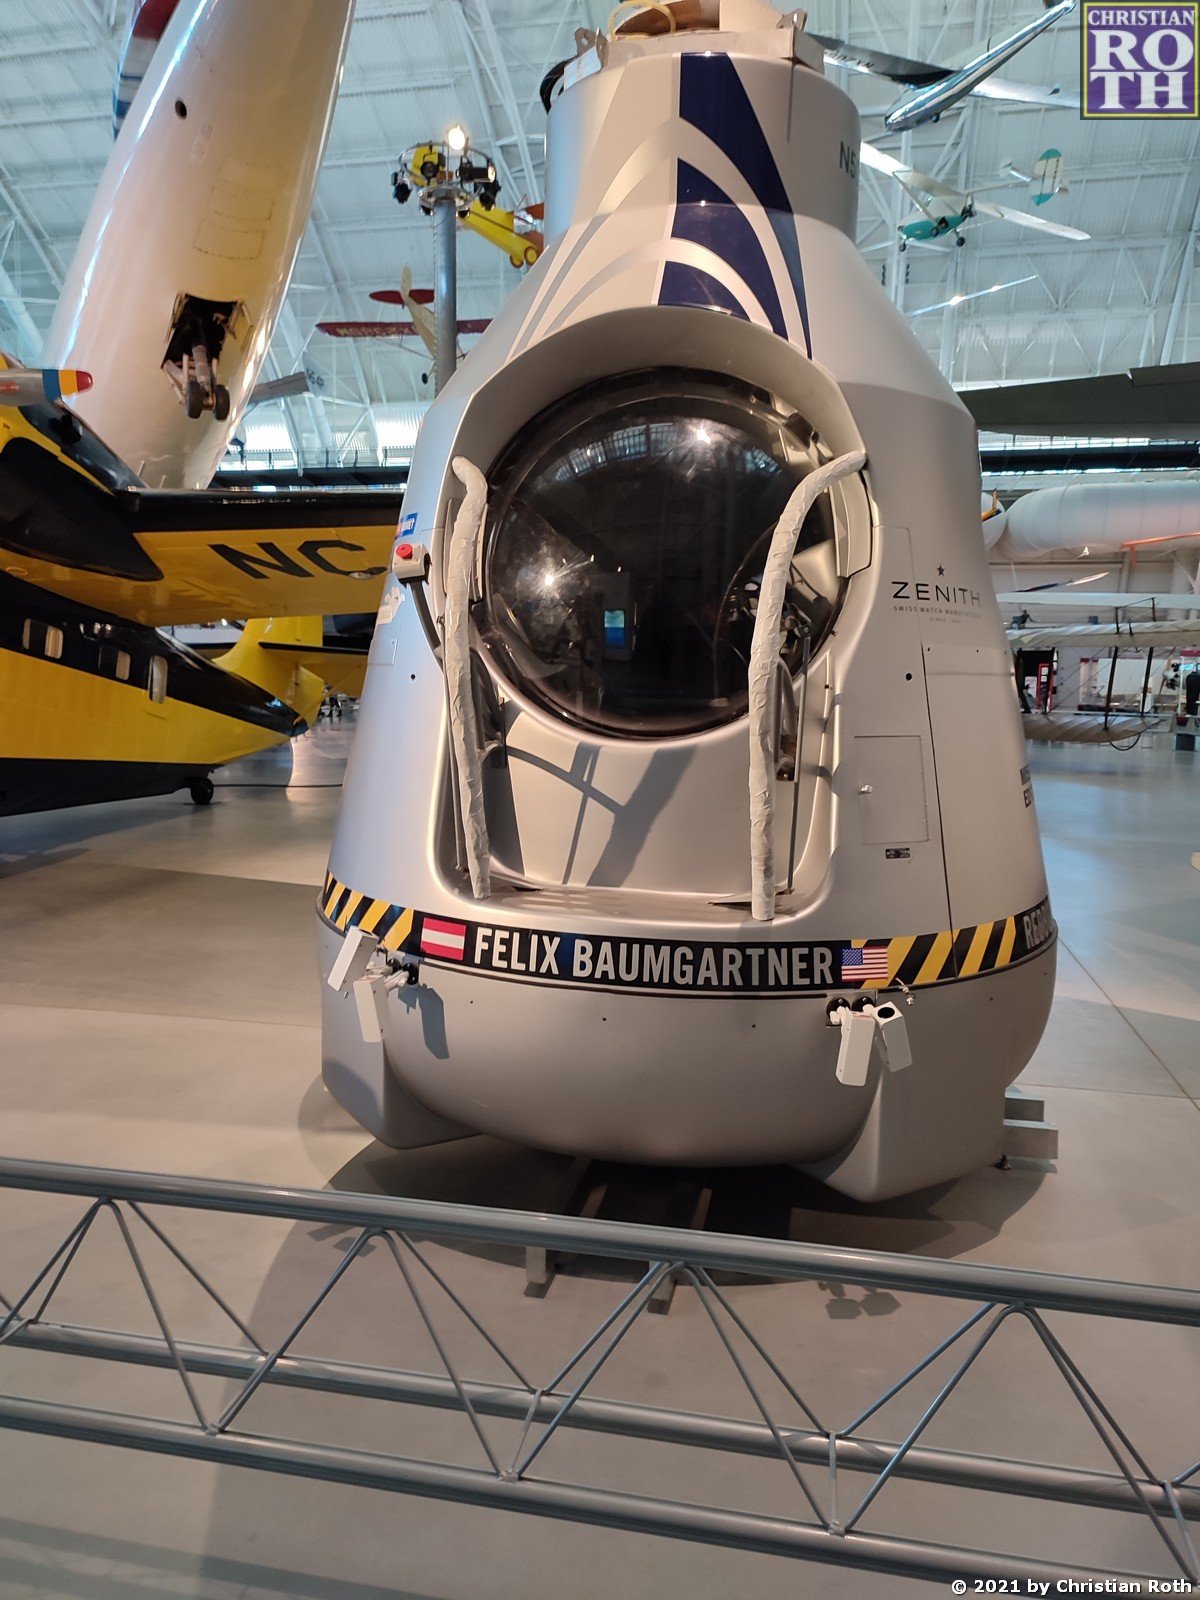 Smithonian Air & Space Museum January 2022